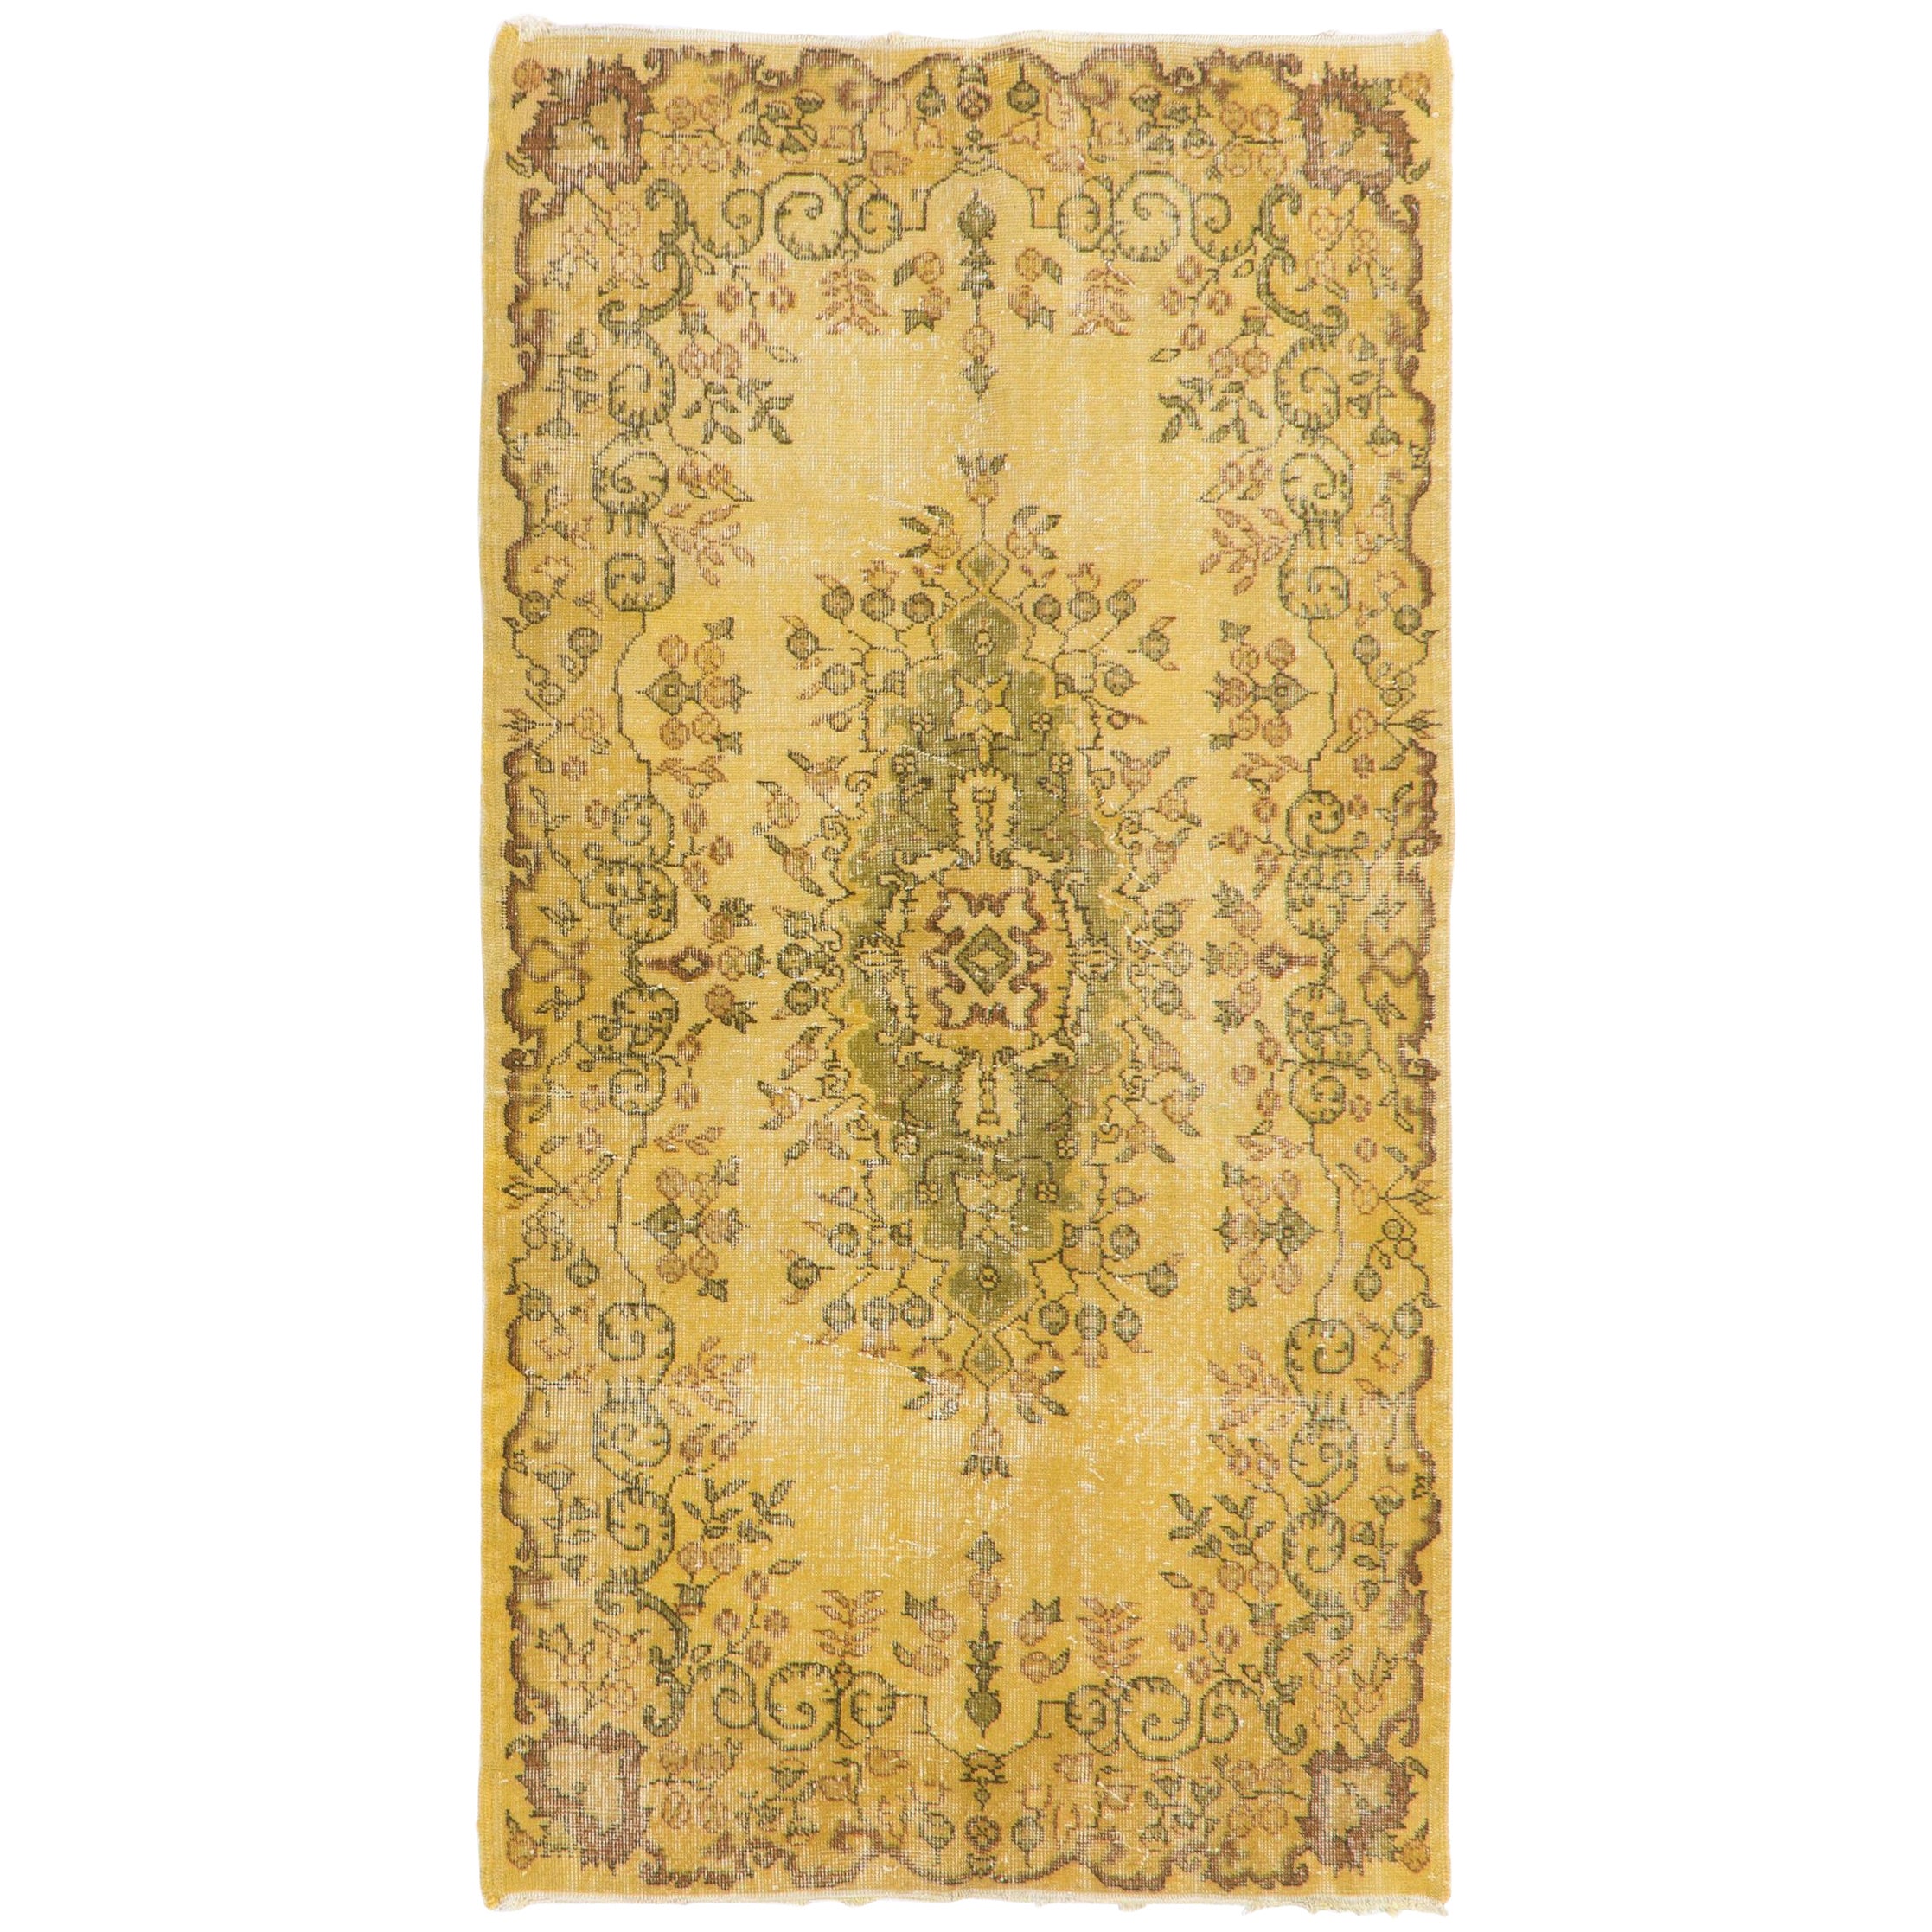 3.8x7.2 Ft Hand-knotted Wool Floral Medallion Rug. Vintage Turkish Yellow Carpet For Sale